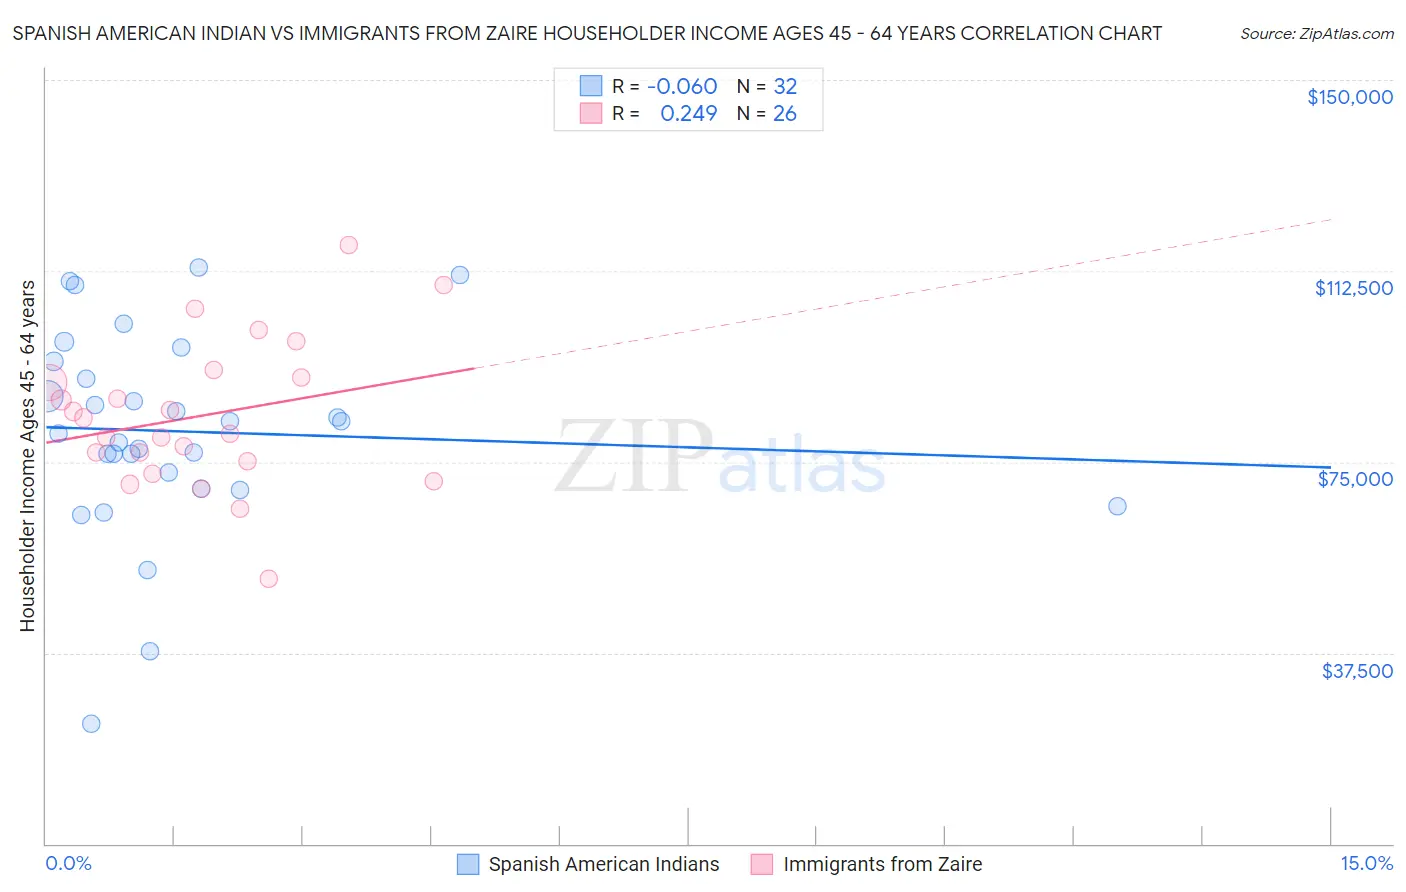 Spanish American Indian vs Immigrants from Zaire Householder Income Ages 45 - 64 years